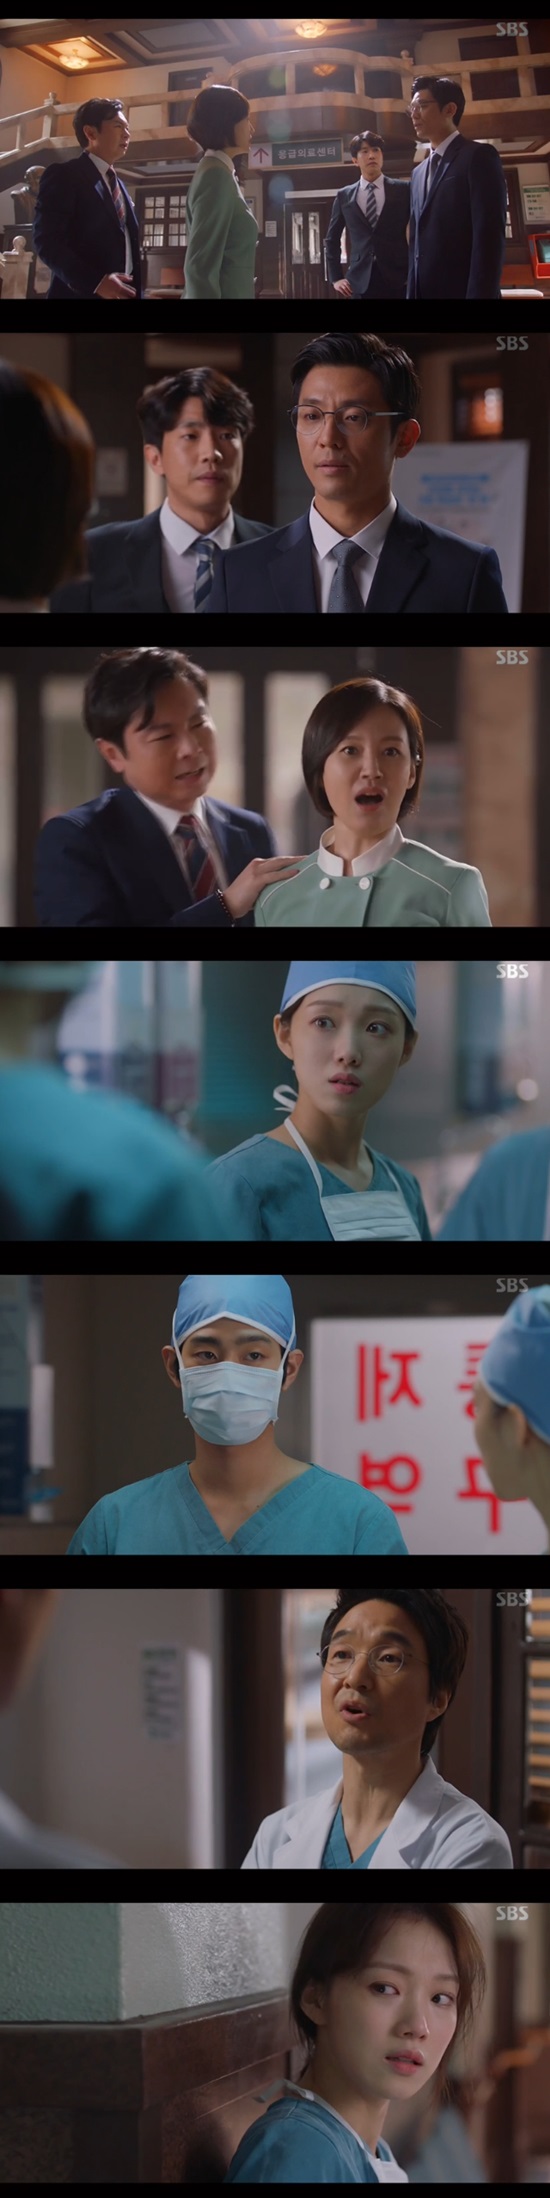 Lee Sung-kyung Misunderstood Ahn Hyo-seopIn the third episode of SBSs Romantic Doctor Kim Sabu 2 broadcast on January 13 (playplay by Kang Eun-kyung/directed by Yoo In-sik) Cha Eun-jae (Lee Sung-kyung) misunderstood Seo Jin (Ahn Hyo-seop minutes).Kim Sa-bu (played by Han Seok-gyu) saved the Korean Military Minister after a difficult operation, but Do Yoon-wan (played by Choi Jin-ho) tried to intercept Park Min-guk (played by Kim Joo-heon) and medical staff.Kim Sabu did not take any action, saying that he was rested because of it, and Seo Woo Jin (Ahn Hyo-seop) said, Will you take the patient like this?Park Eun-tak (played by Kim Min-jae) explained that everyone trusts Kim Sa-bu and follows Kim Sa-bus will.At the same time, Park Min-guk needed doctors who went into the first operation for the second surgery of Korea Military Minister, and suggested surgery to Lee Sung-kyung first.Cha Eun-jae asked Seo Woo Jin to go back to the main office after going into surgery together, saying, Lets make our alliance, but Seo Woo Jin opposed, You should go in alone.Cha Eun-jae went into surgery alone, but this time, Professor Park Min-guk refused.Because I learned that Cha Eun-jae has surgery.Then, when Seo Woo Jin came in, Cha Eun-jae said that Seo Woo Jin hit the back of my head and Misunderstood Bad Child.But the reason Seo Woo Jin came in was because of Kims order. Kim said, I do not ask your opinion.Do as you are told. Seo Woo Jin was sent to the Korea Military Ministers surgery.Yoo Gyeong-sang